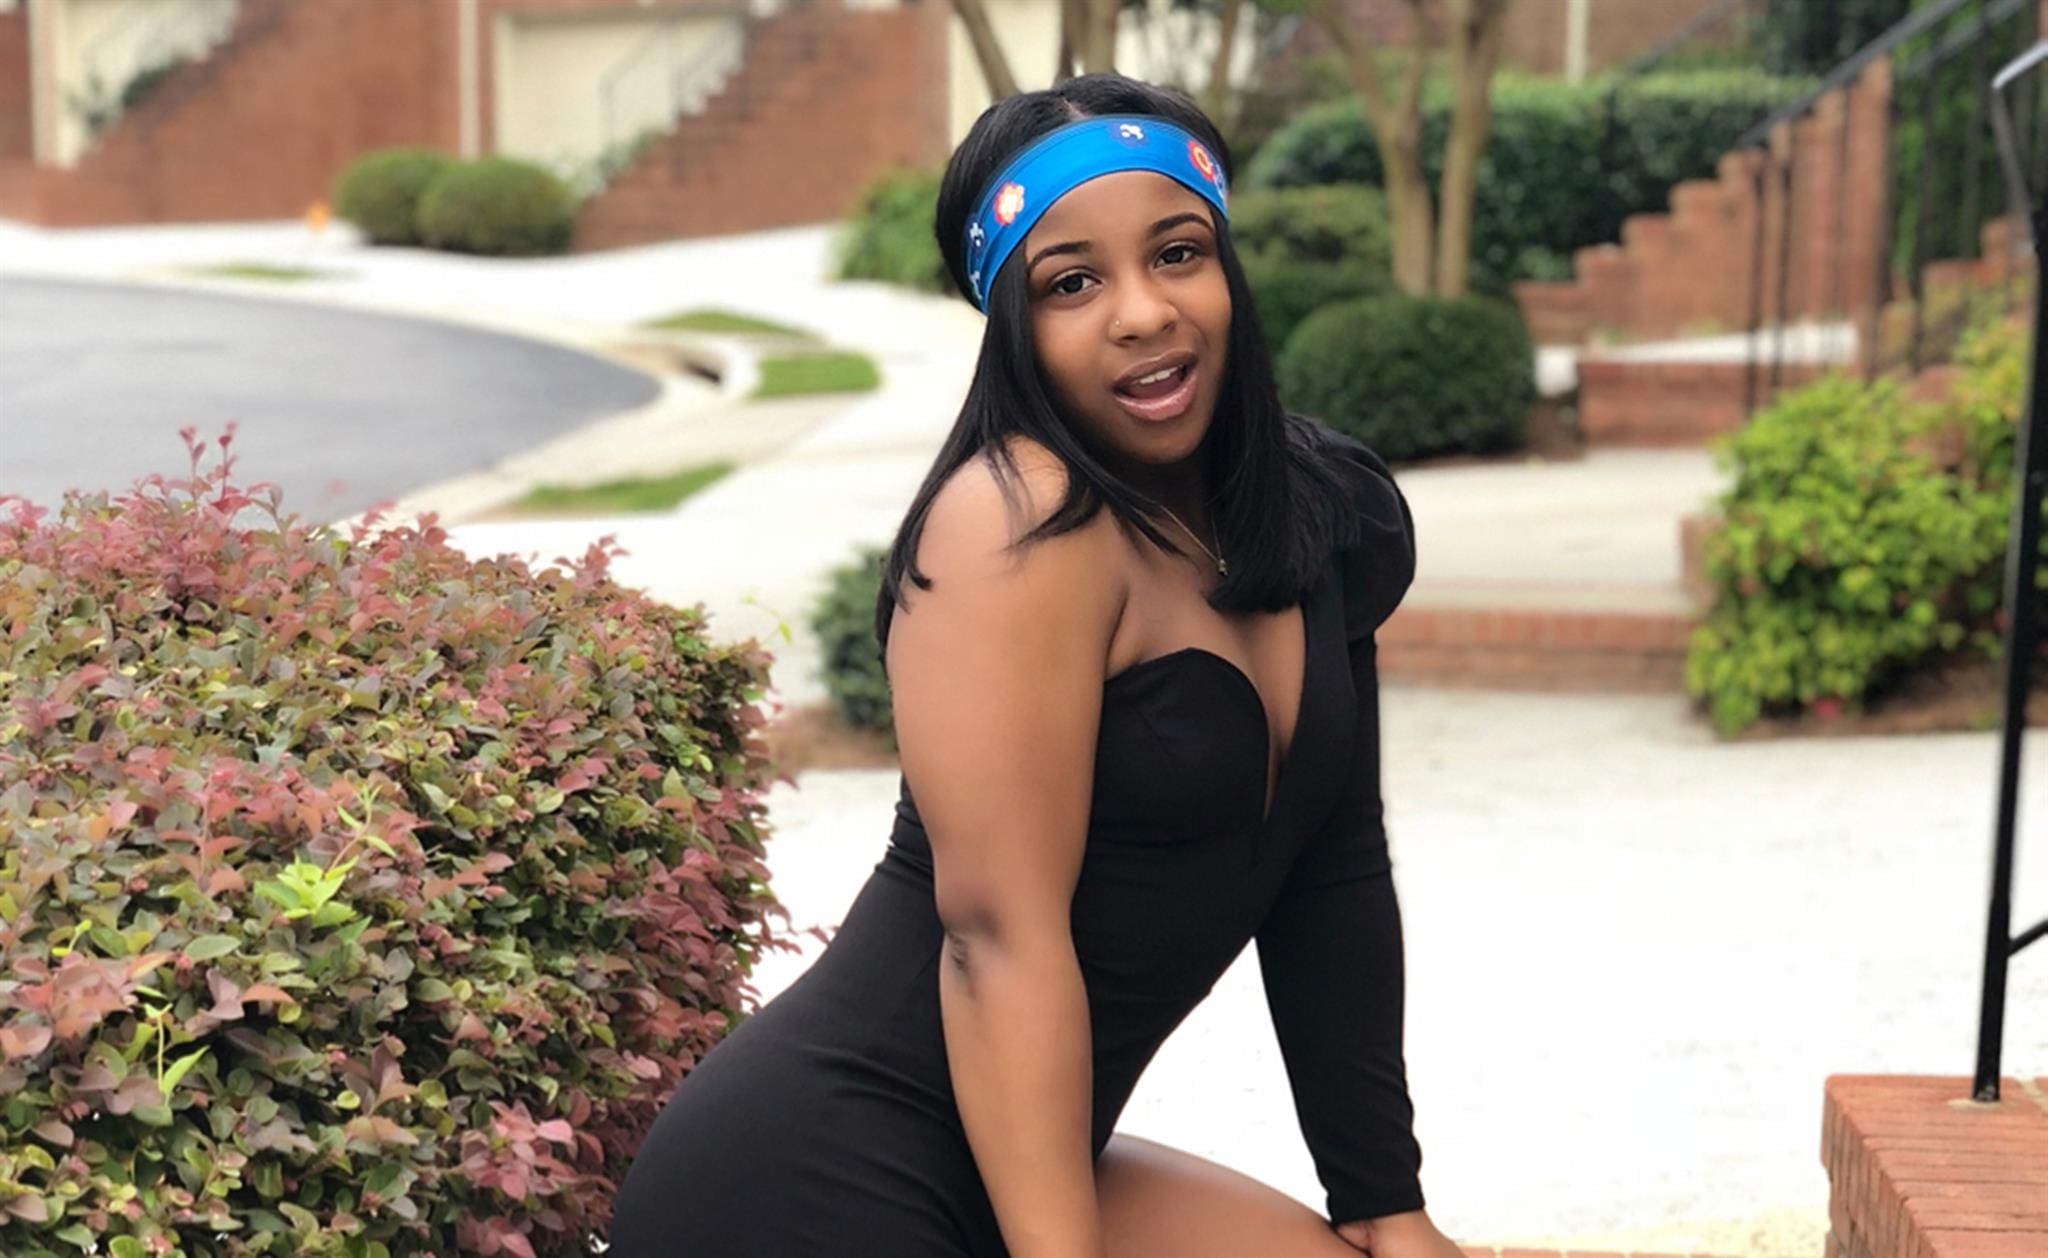 Reginae Carter Continues To Upset Tiny Harris With This Photo - Check Out What She Did